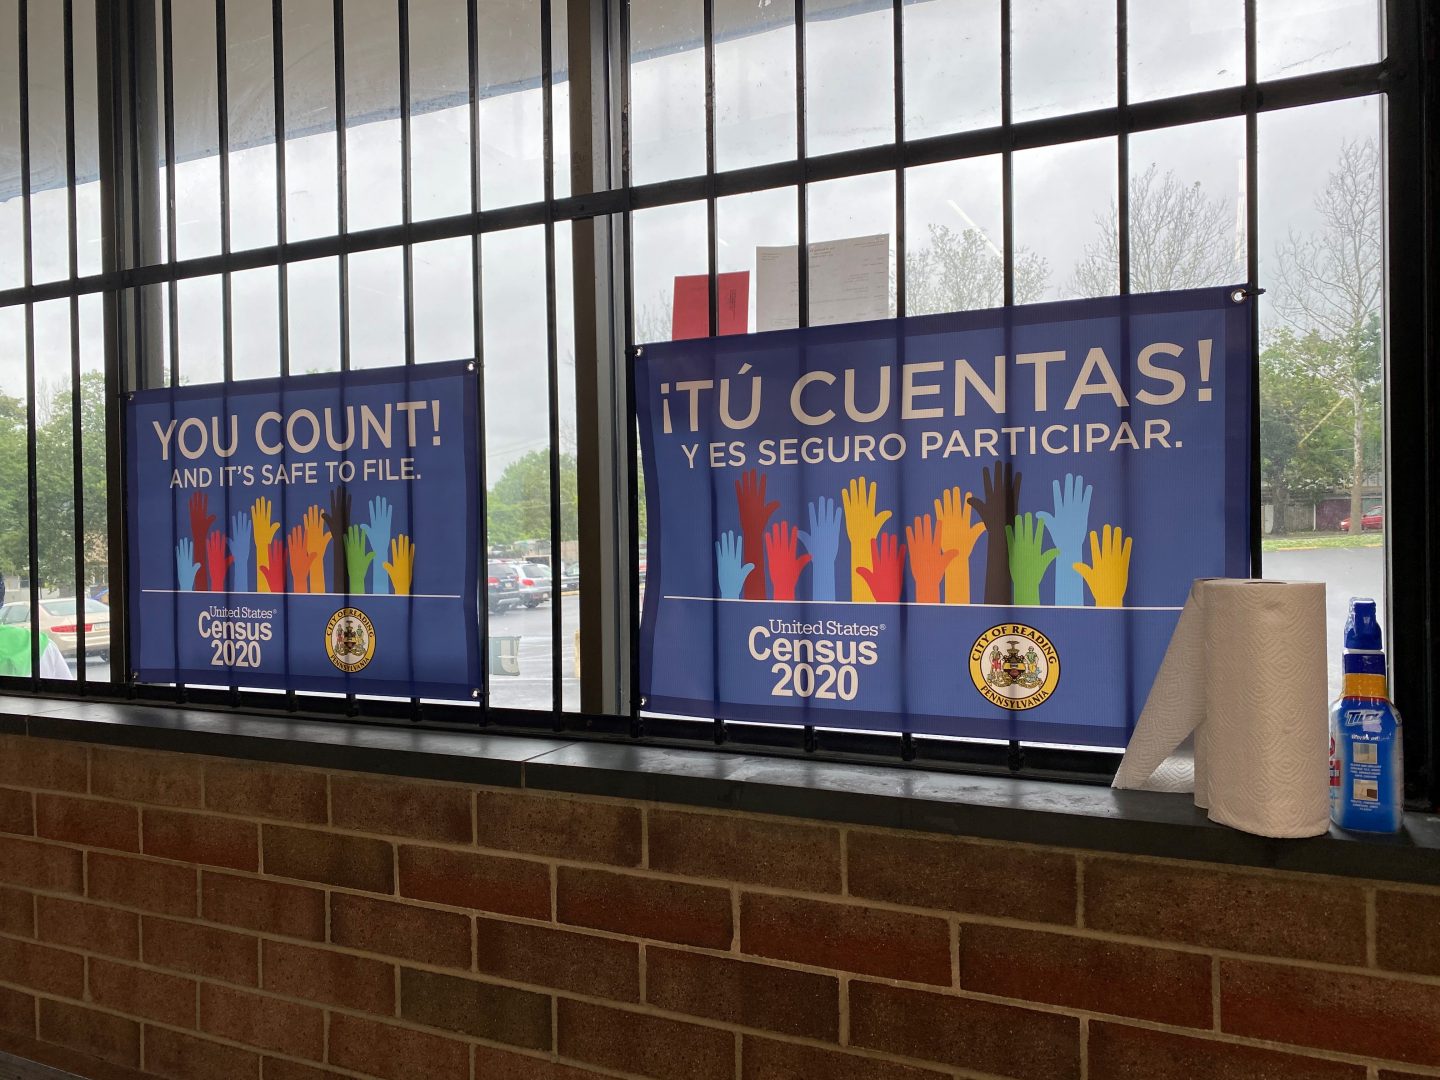 English and Spanish displays at Fine Fare Supermarket in Reading encourage customers to take part in the 2020 U.S. Census. Berks County’s Complete Count Committee recently distributed the signs to stores across Reading.